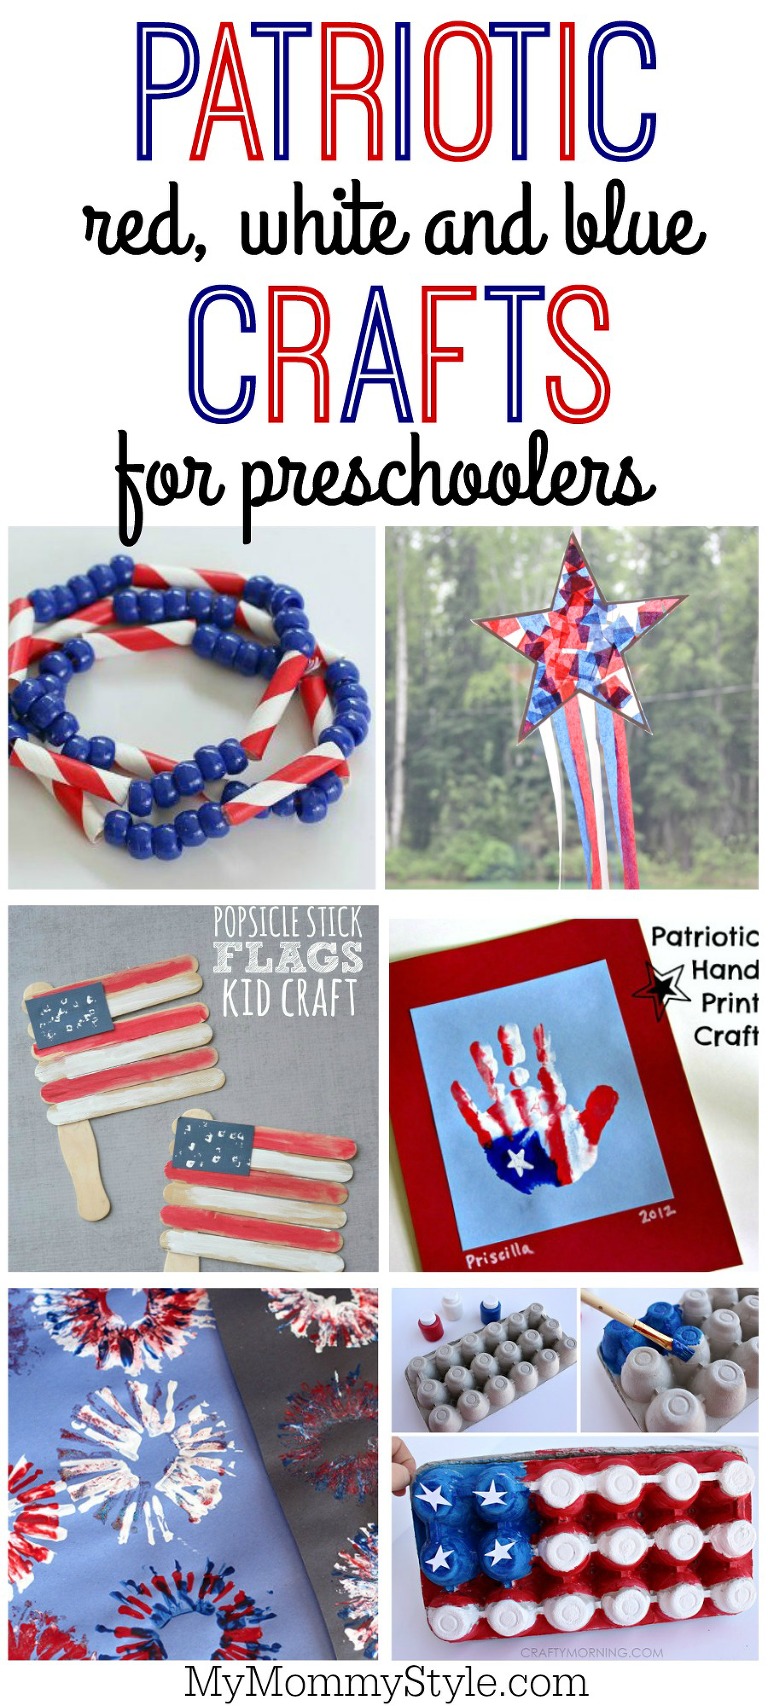 Patriotic red white and blue crafts for kids for 4th of july or Memorial day